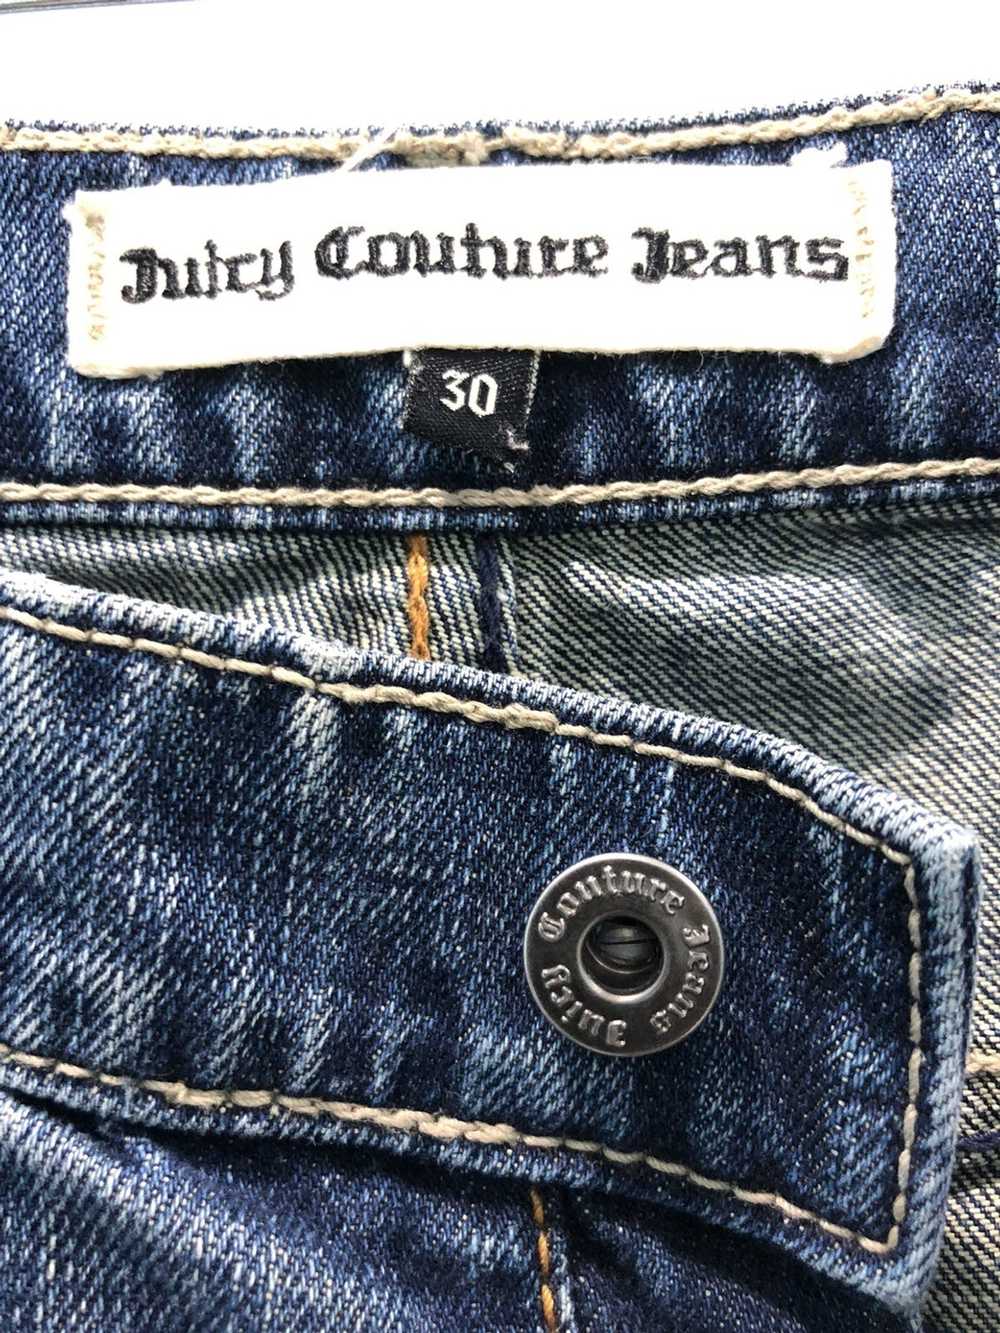 Juicy Couture Jeans Juicy Couture Jeans Design Ma… - image 6